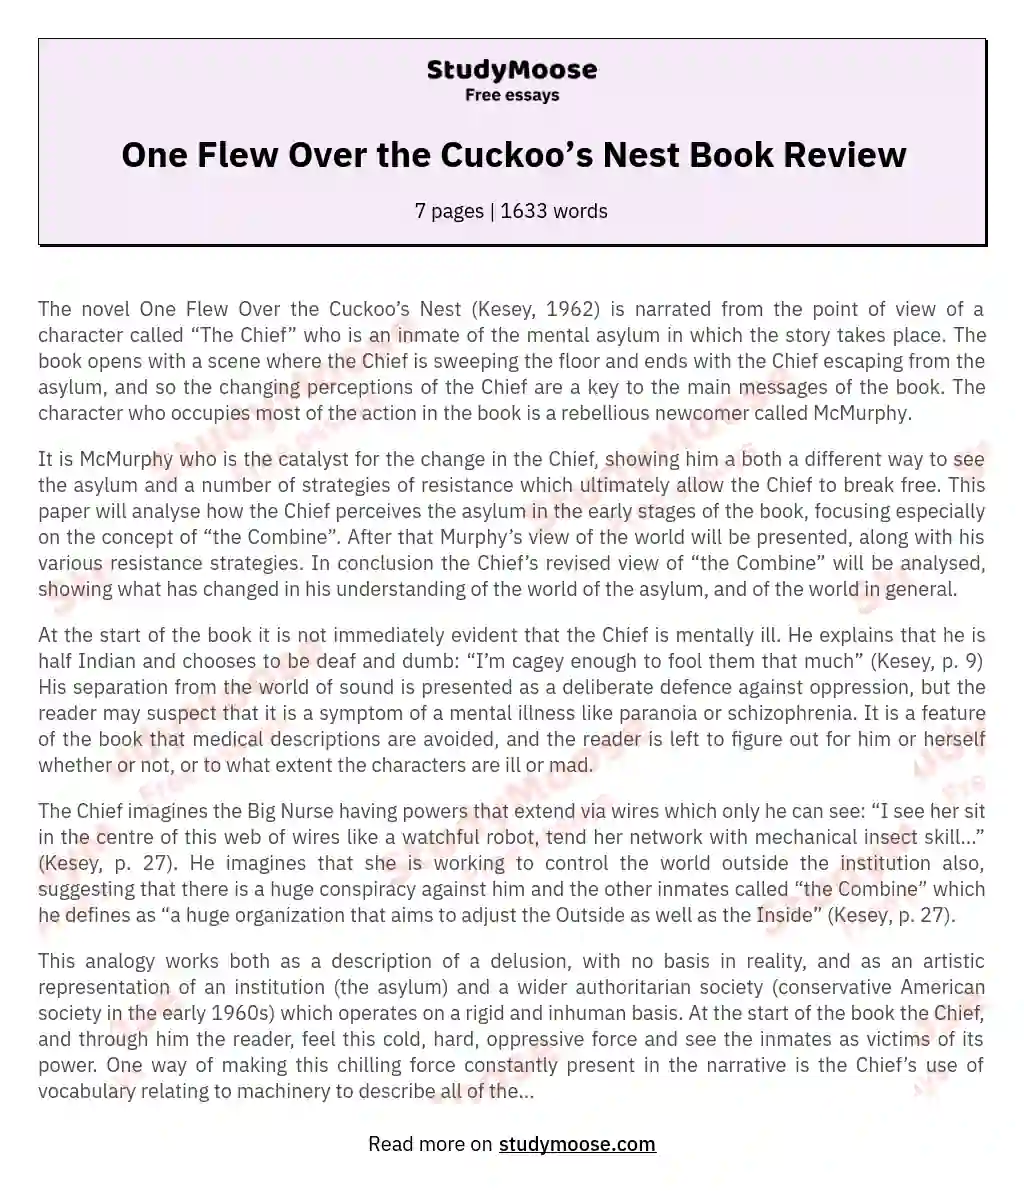 One Flew Over the Cuckoo’s Nest Book Review essay